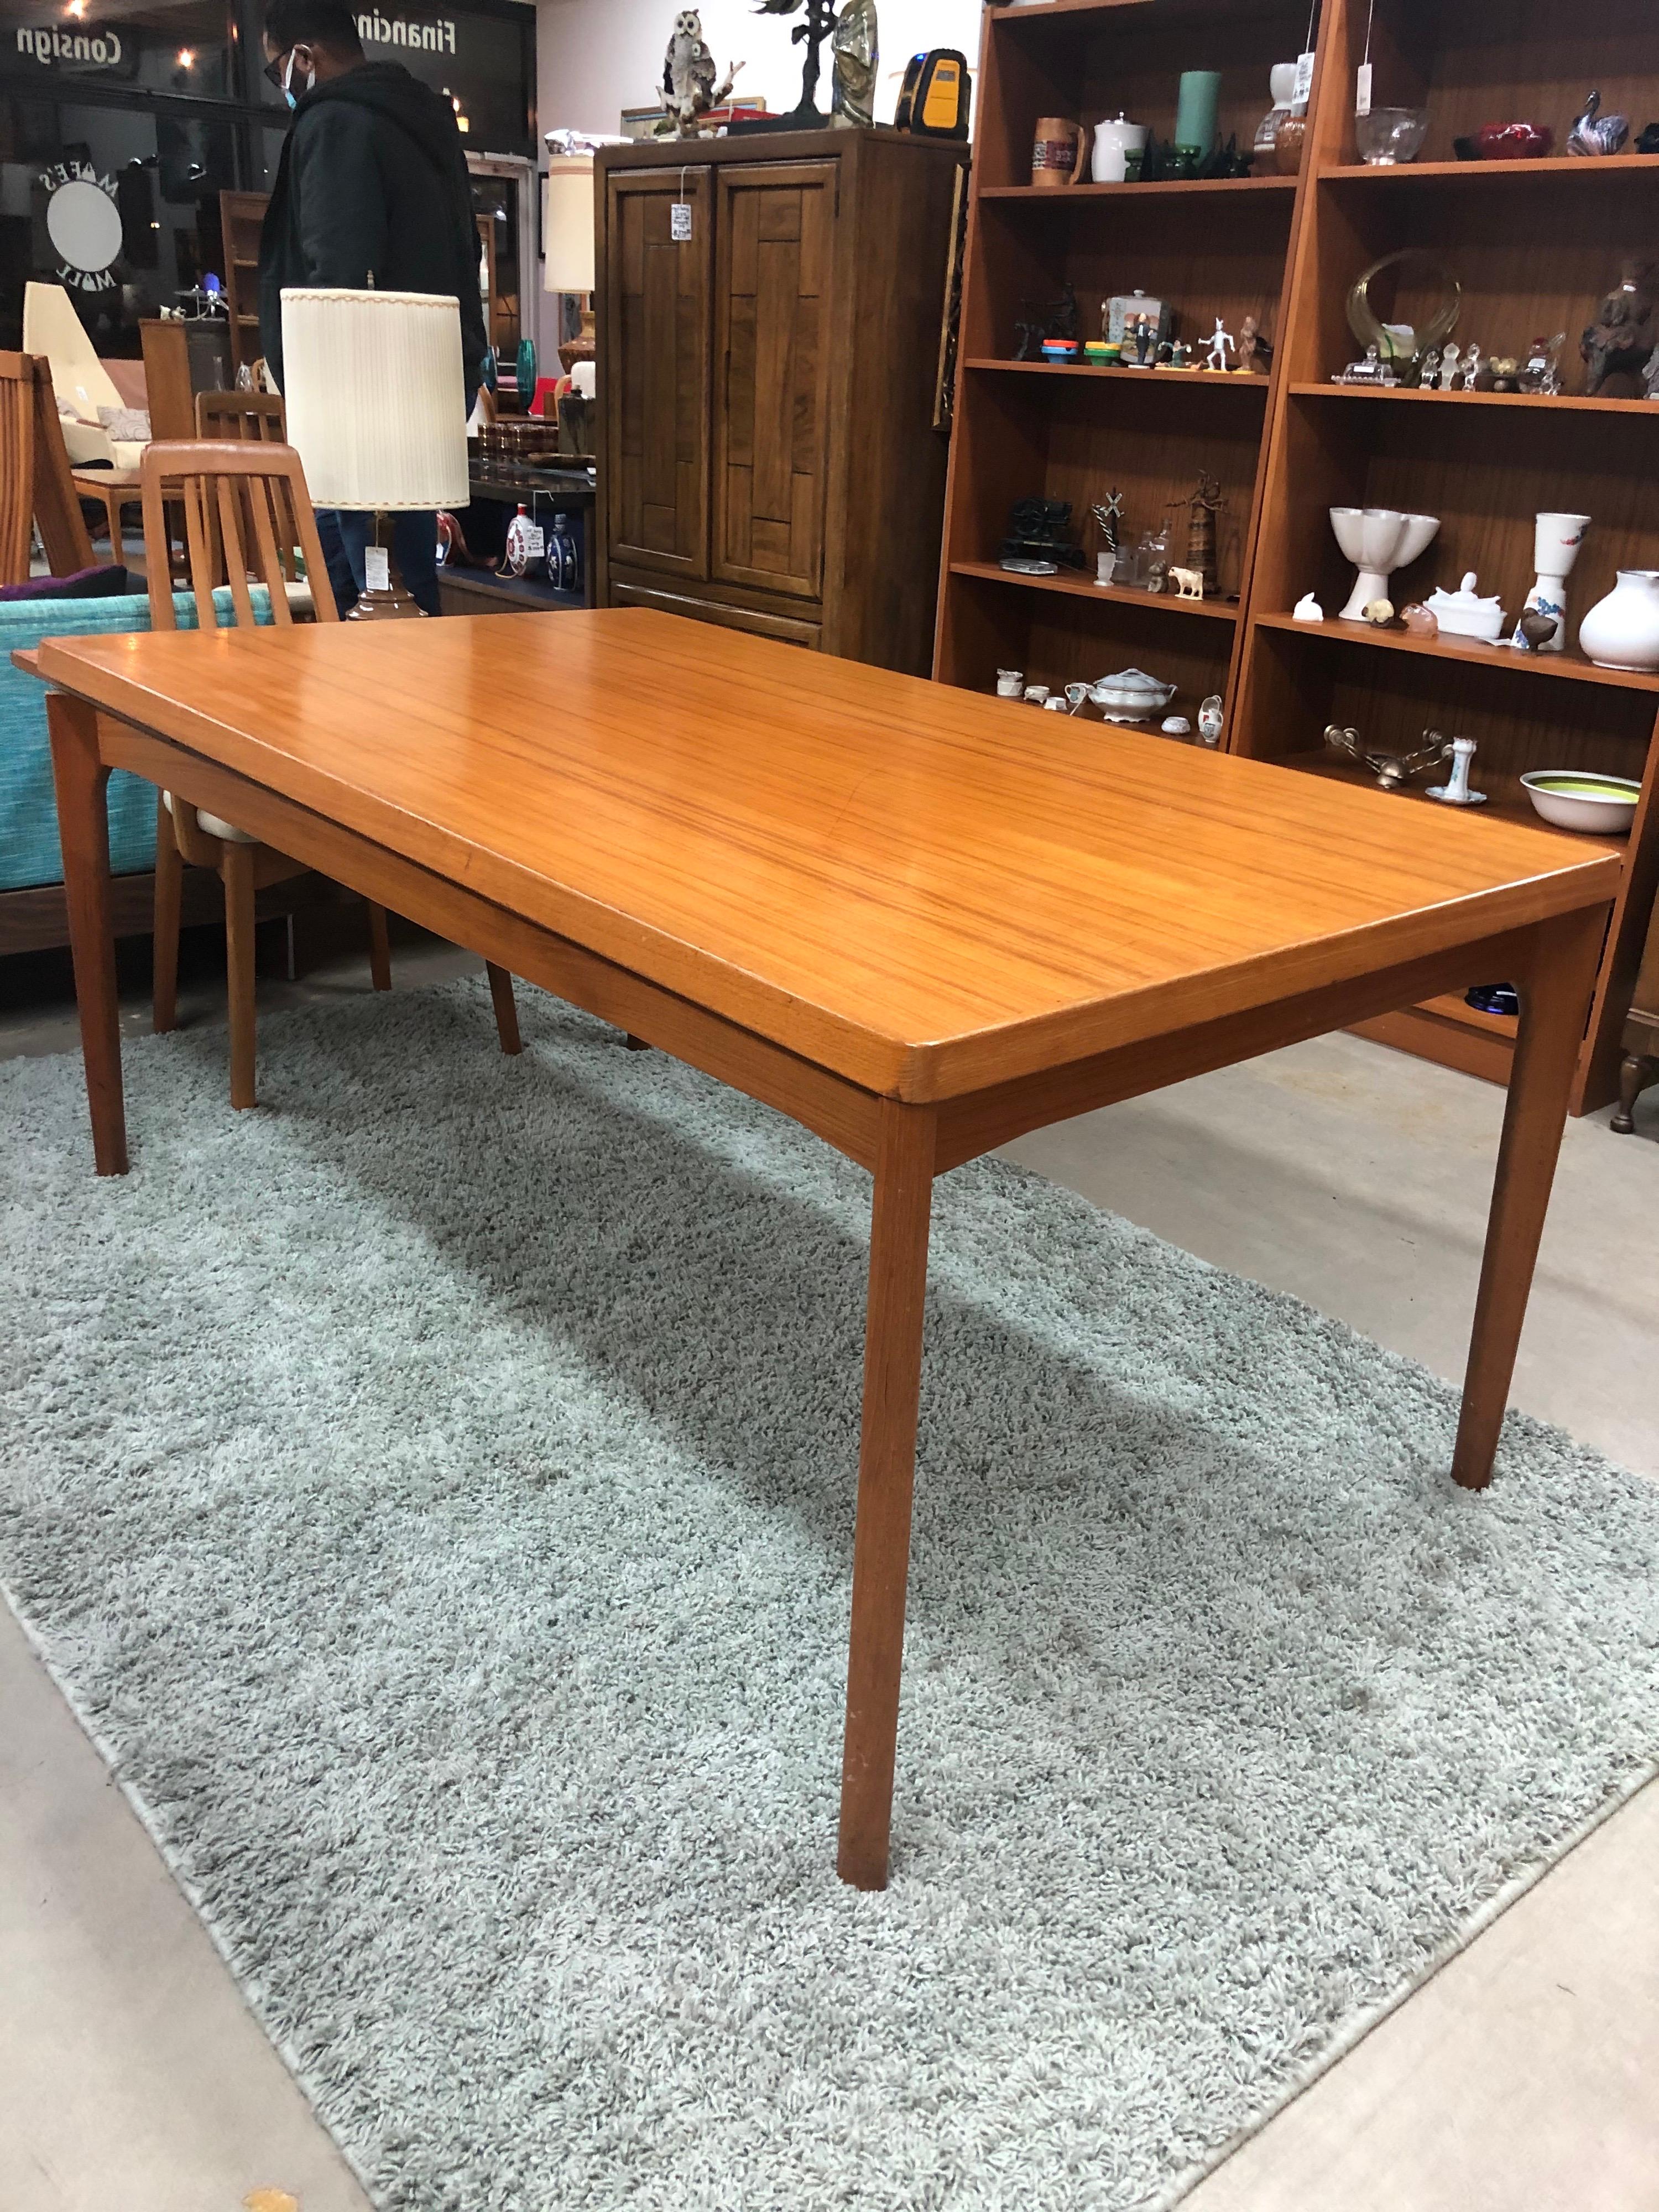 This large draw leaf Vejle stole dining table stands firm in its solid pine core covered with a teak veneer. Designed by Henning Kjaernulf for Vejle Stole og Møbelfabrik, this hefty beauty boasts solid teak legs and gorgeous edge banding. The